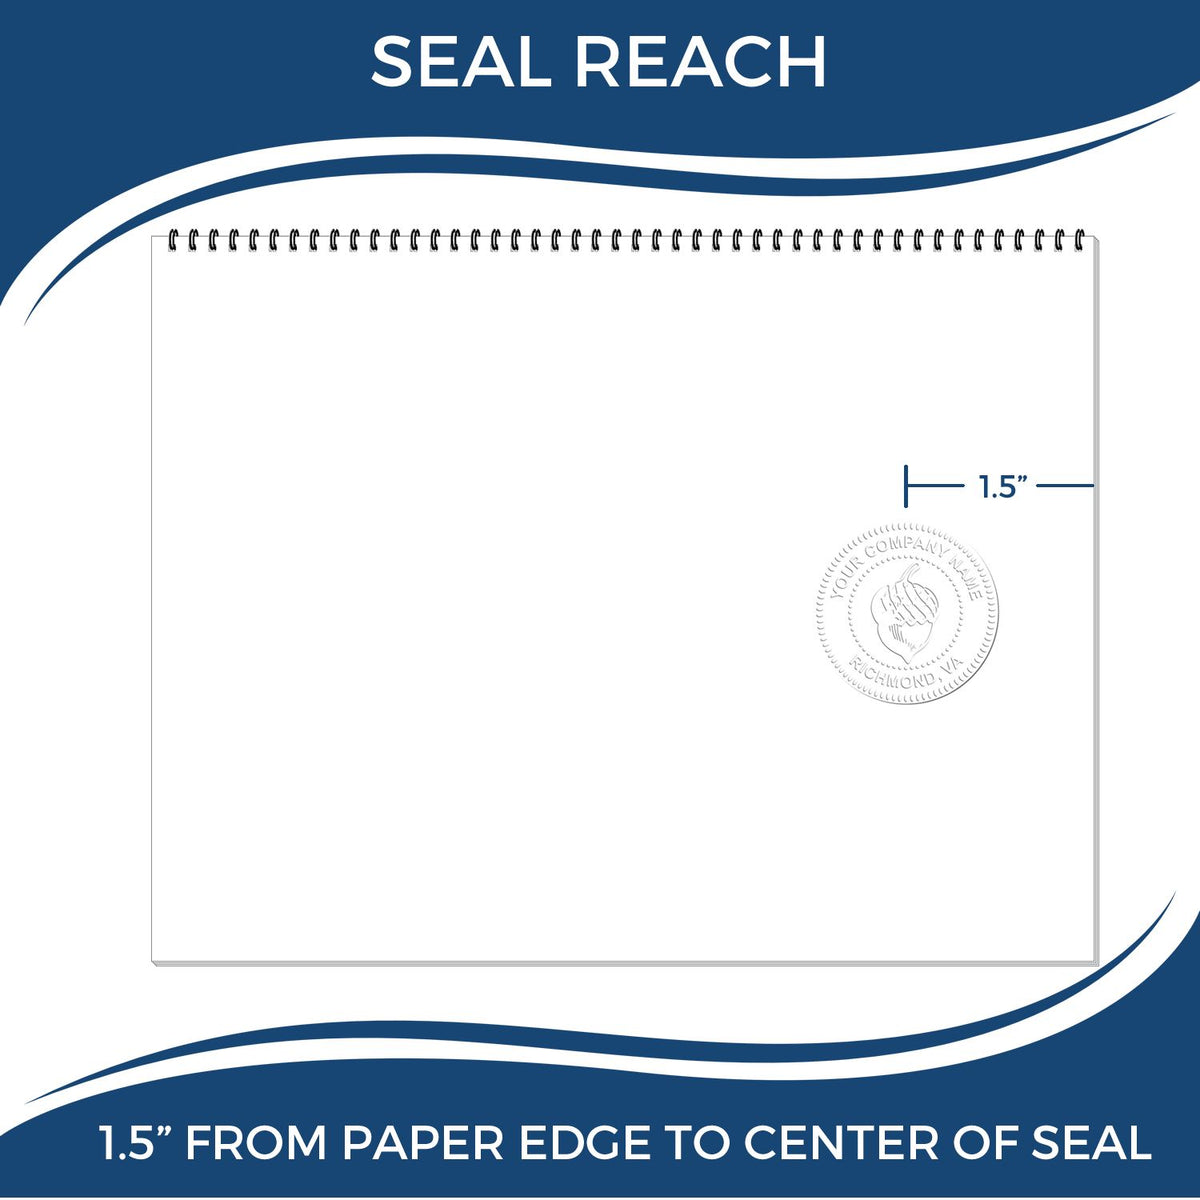 An infographic showing the seal reach which is represented by a ruler and a miniature seal image of the Gift Kentucky Engineer Seal